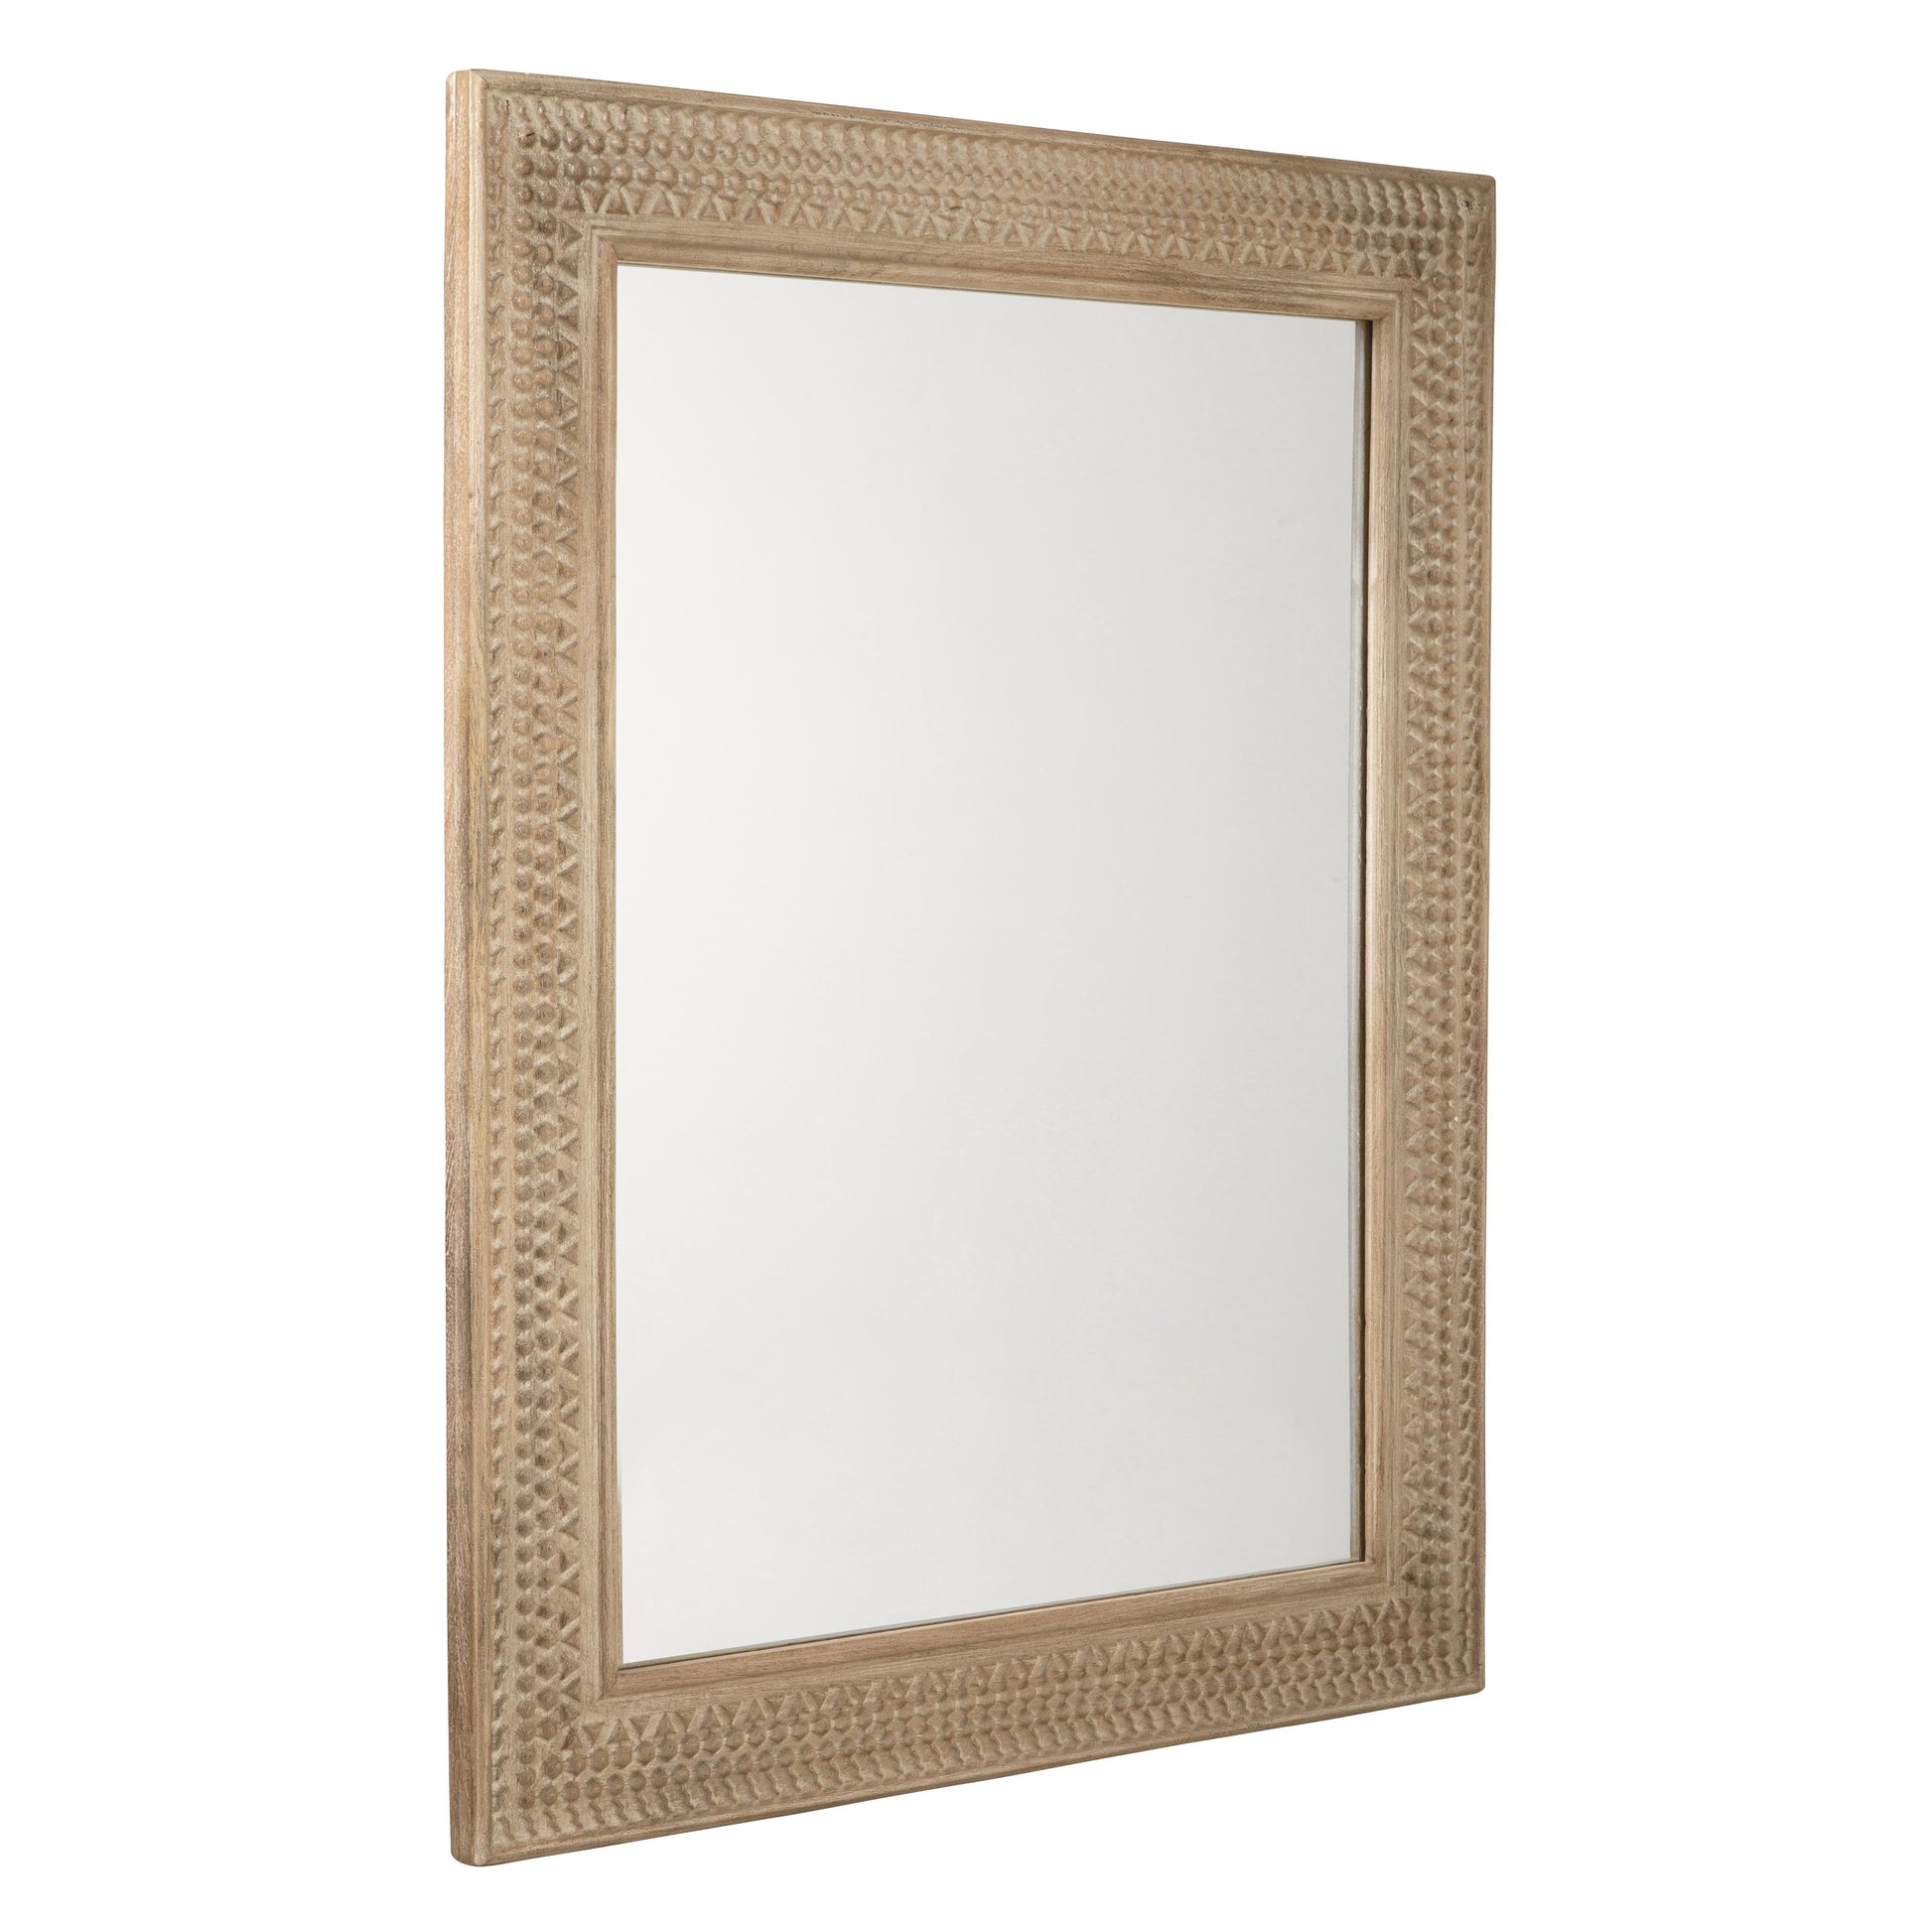 Signature Design by Ashley Belenburg Wall Mirror A8010273 IMAGE 1